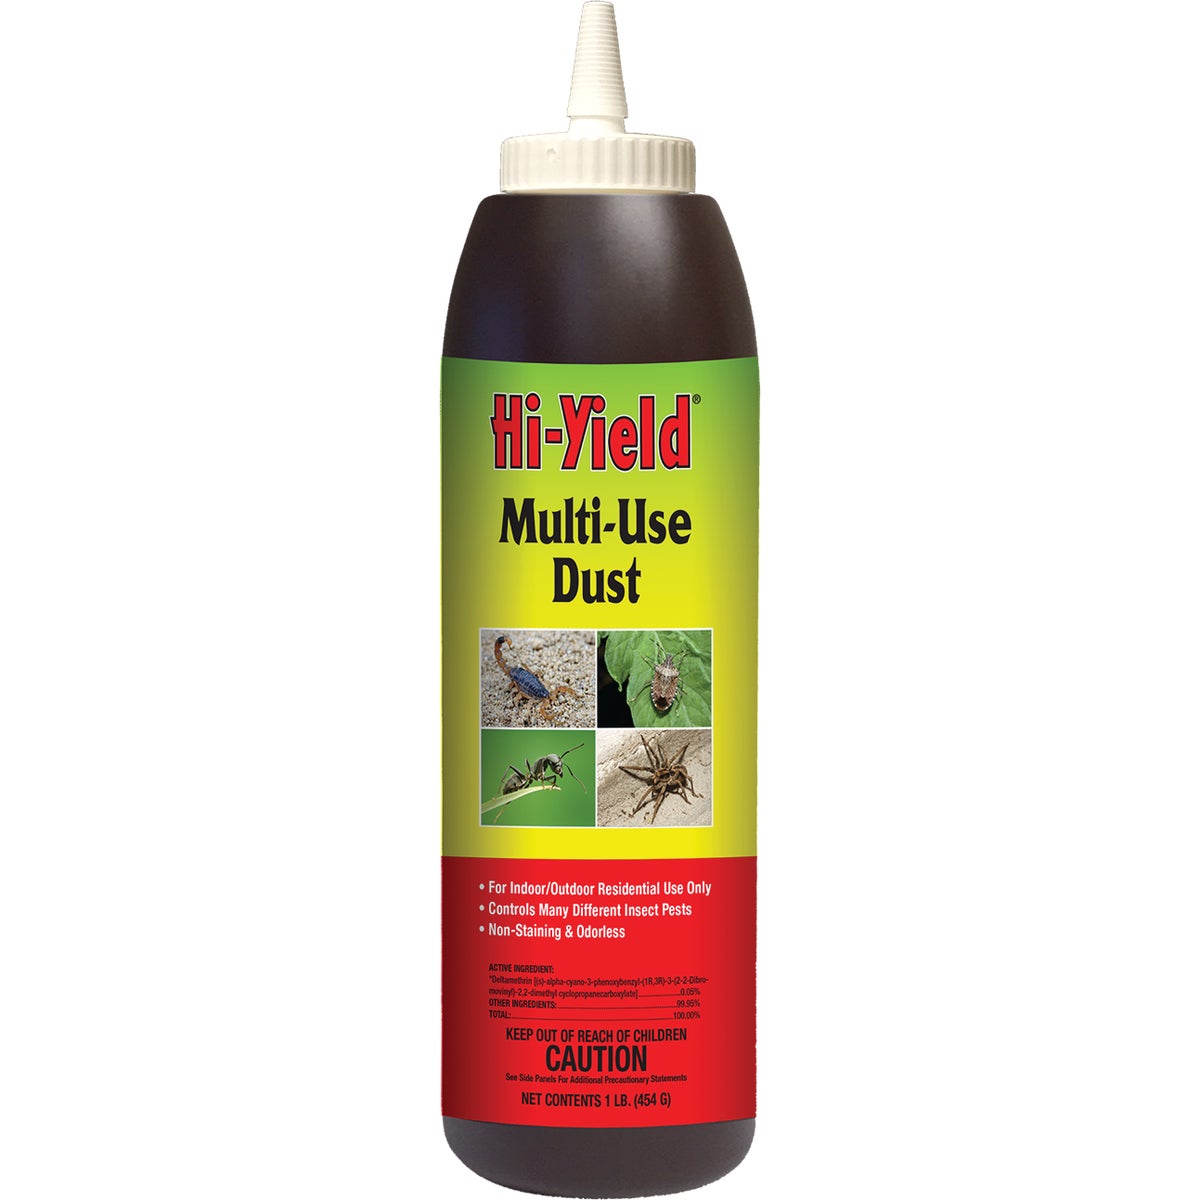 Item 704248, Multi-use insect control dust.